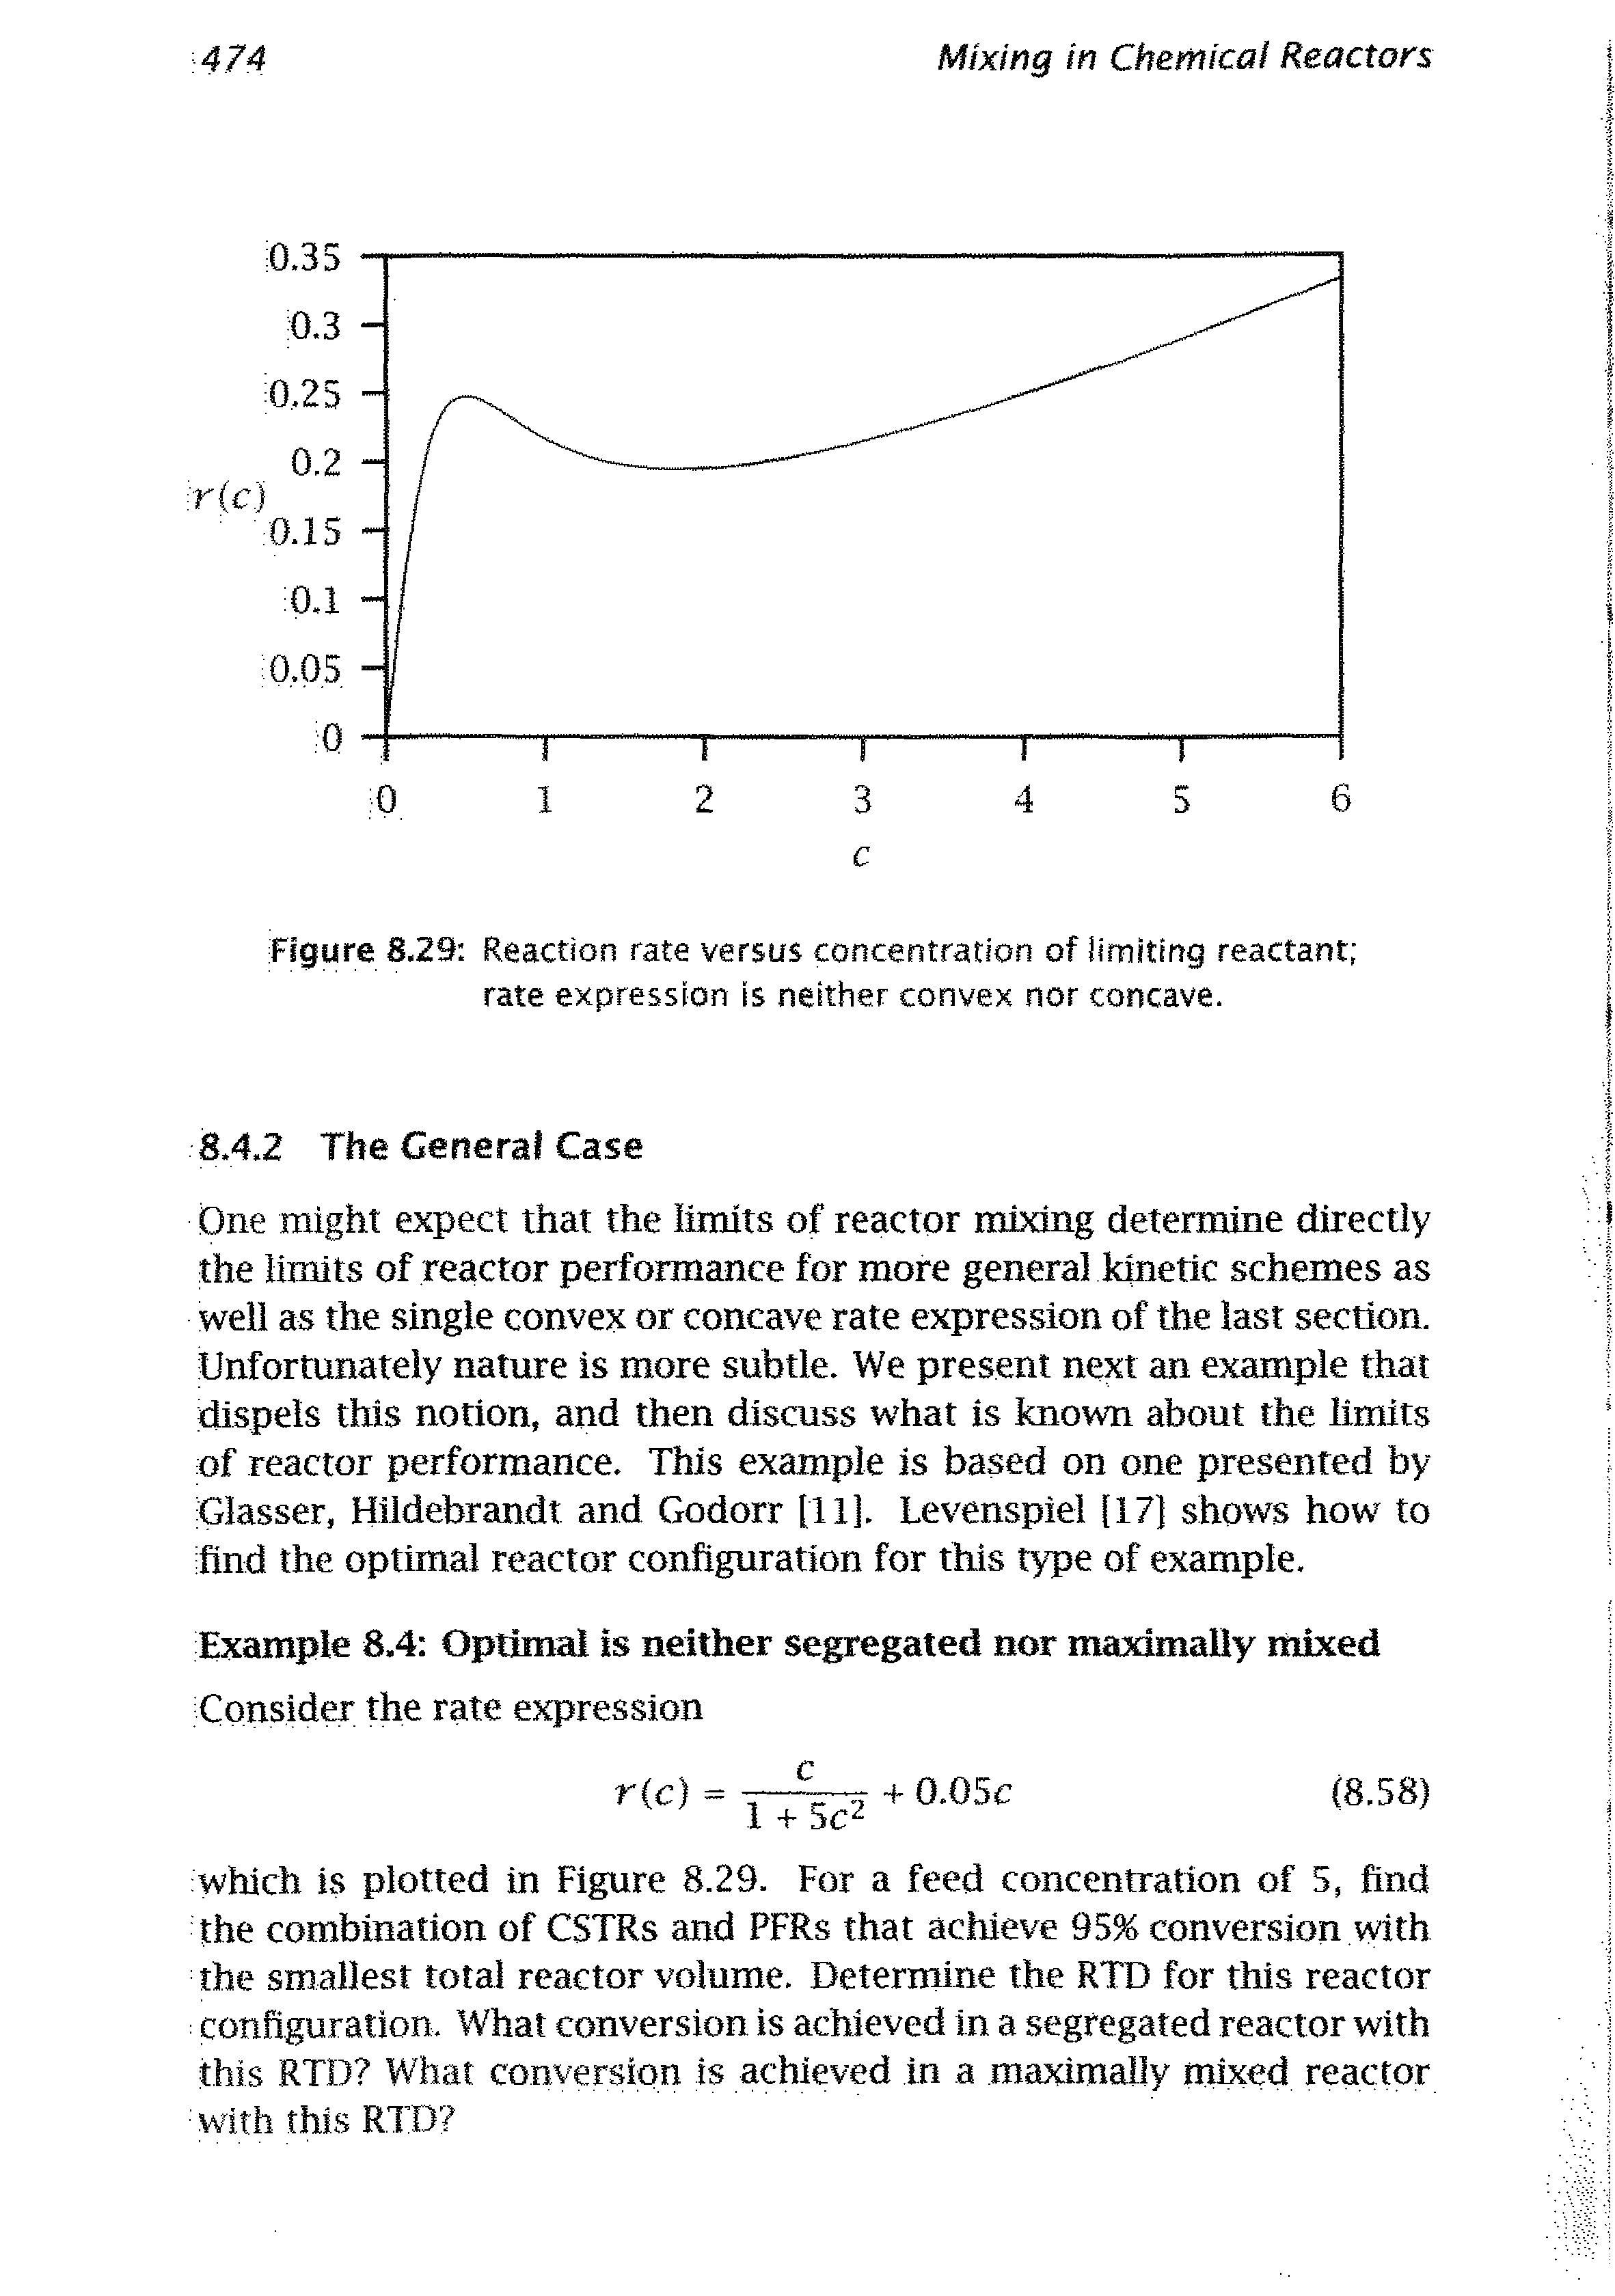 Figure 8.29 Reaction rate versus concentration of iimitmg reactant rate expression is neither convex nor concave.